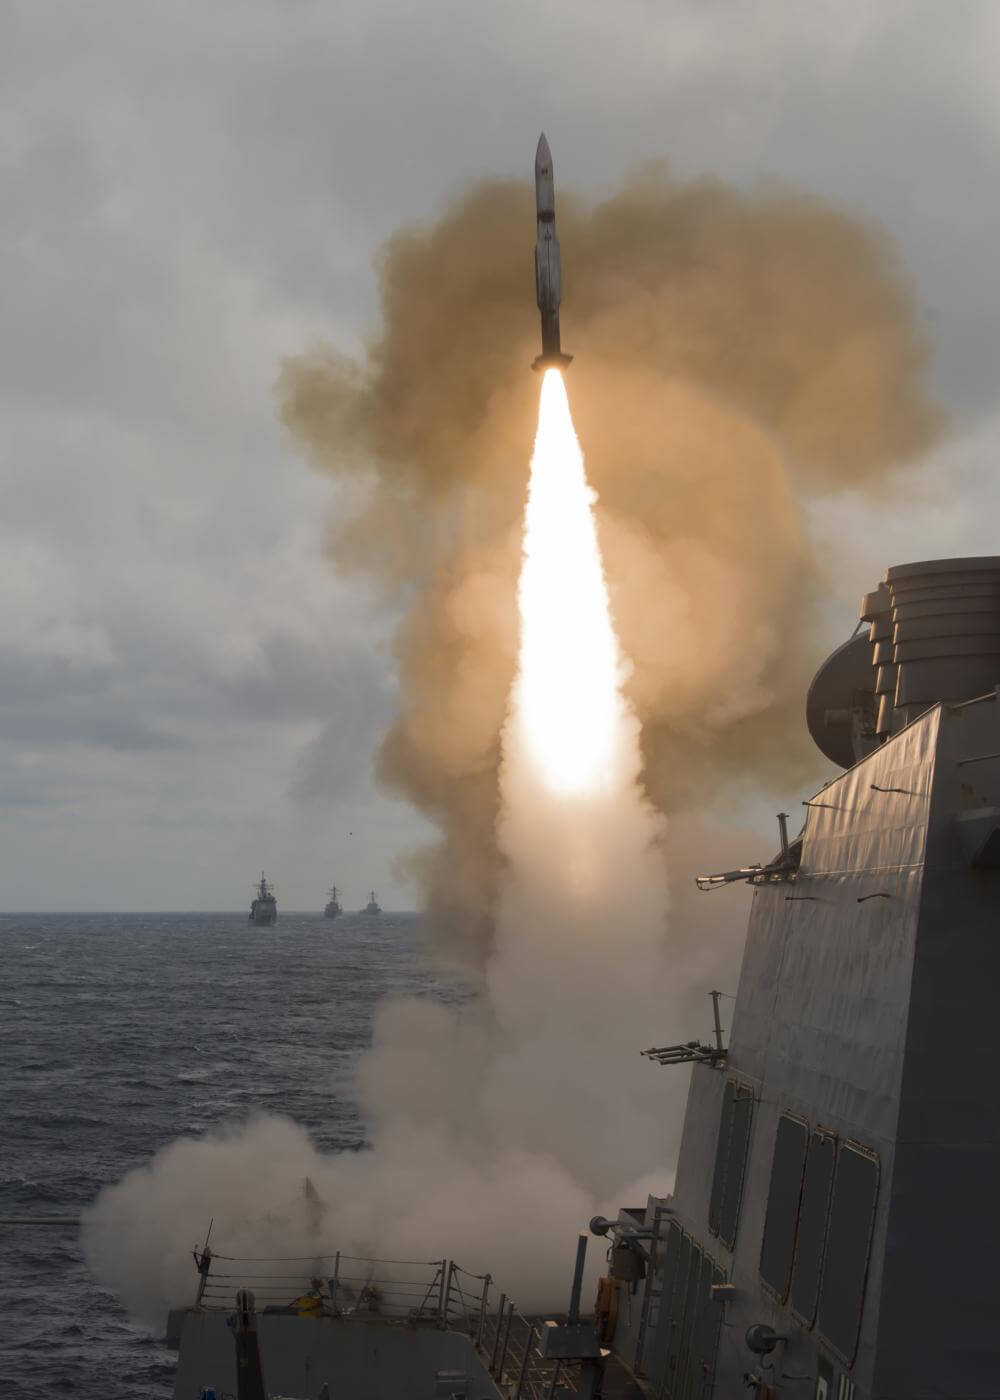 SM-2 1500 lb missile launched during test